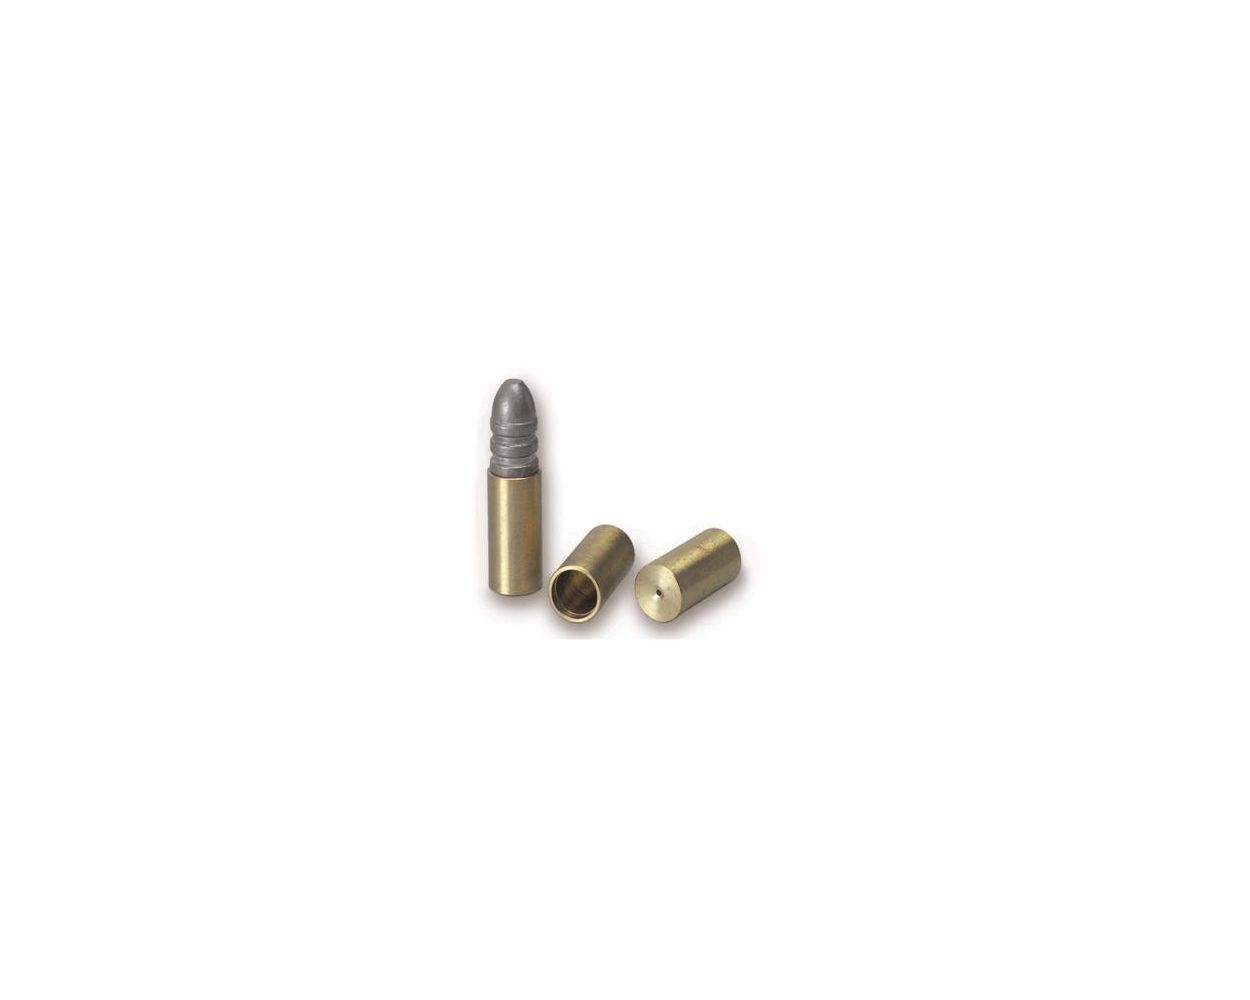 Pedersoli Brass Cases for Percussion Sharps Muzzle Loaders for Sale